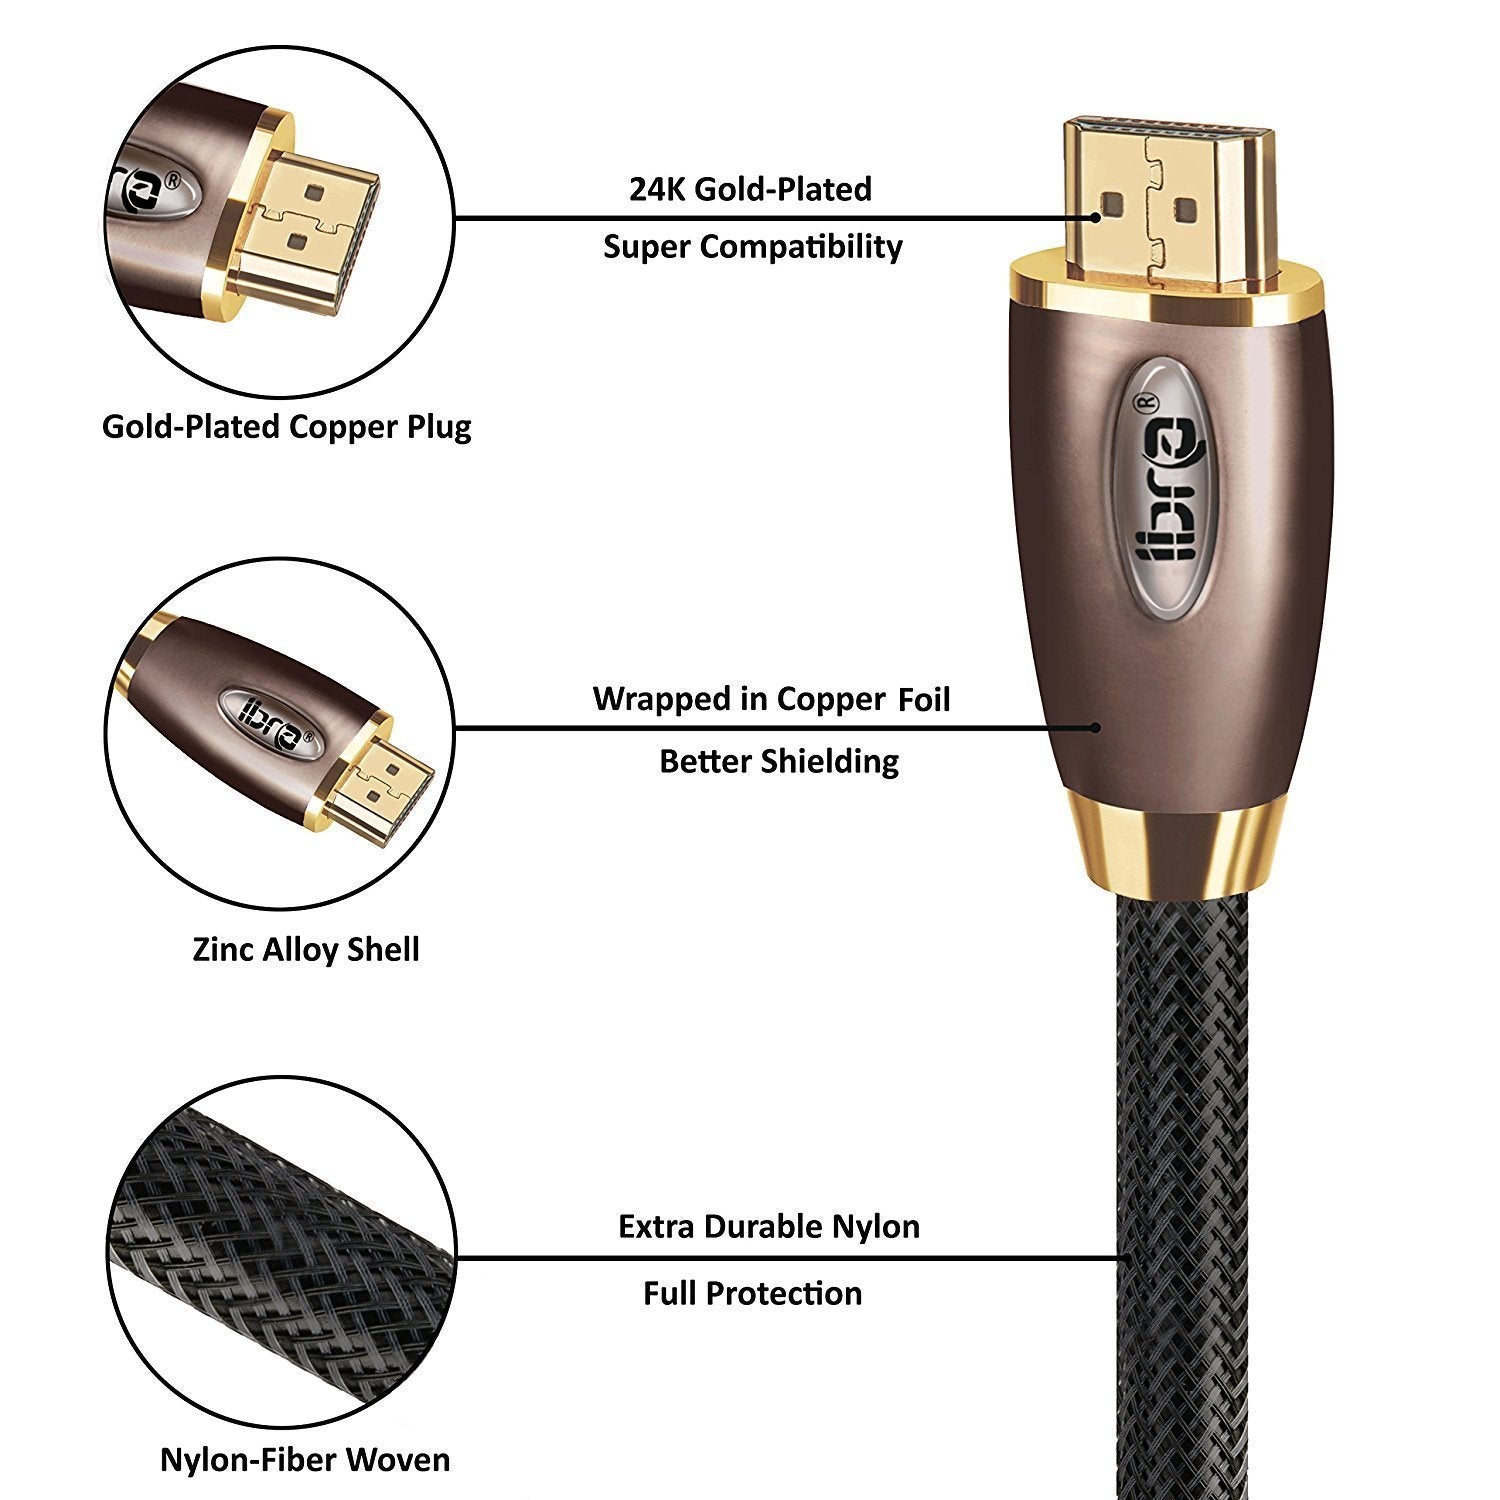 HDMI Cable 6M - 4K UHD HDMI 2.0(4K@60Hz) Ready -18Gbps-28AWG Braided Cord -Gold Plated Connectors -Ethernet,Audio Return -Video 4K 2160p,HD 1080p,3D -Xbox PlayStation PS3 PS4 PC Apple TV -IBRA RED